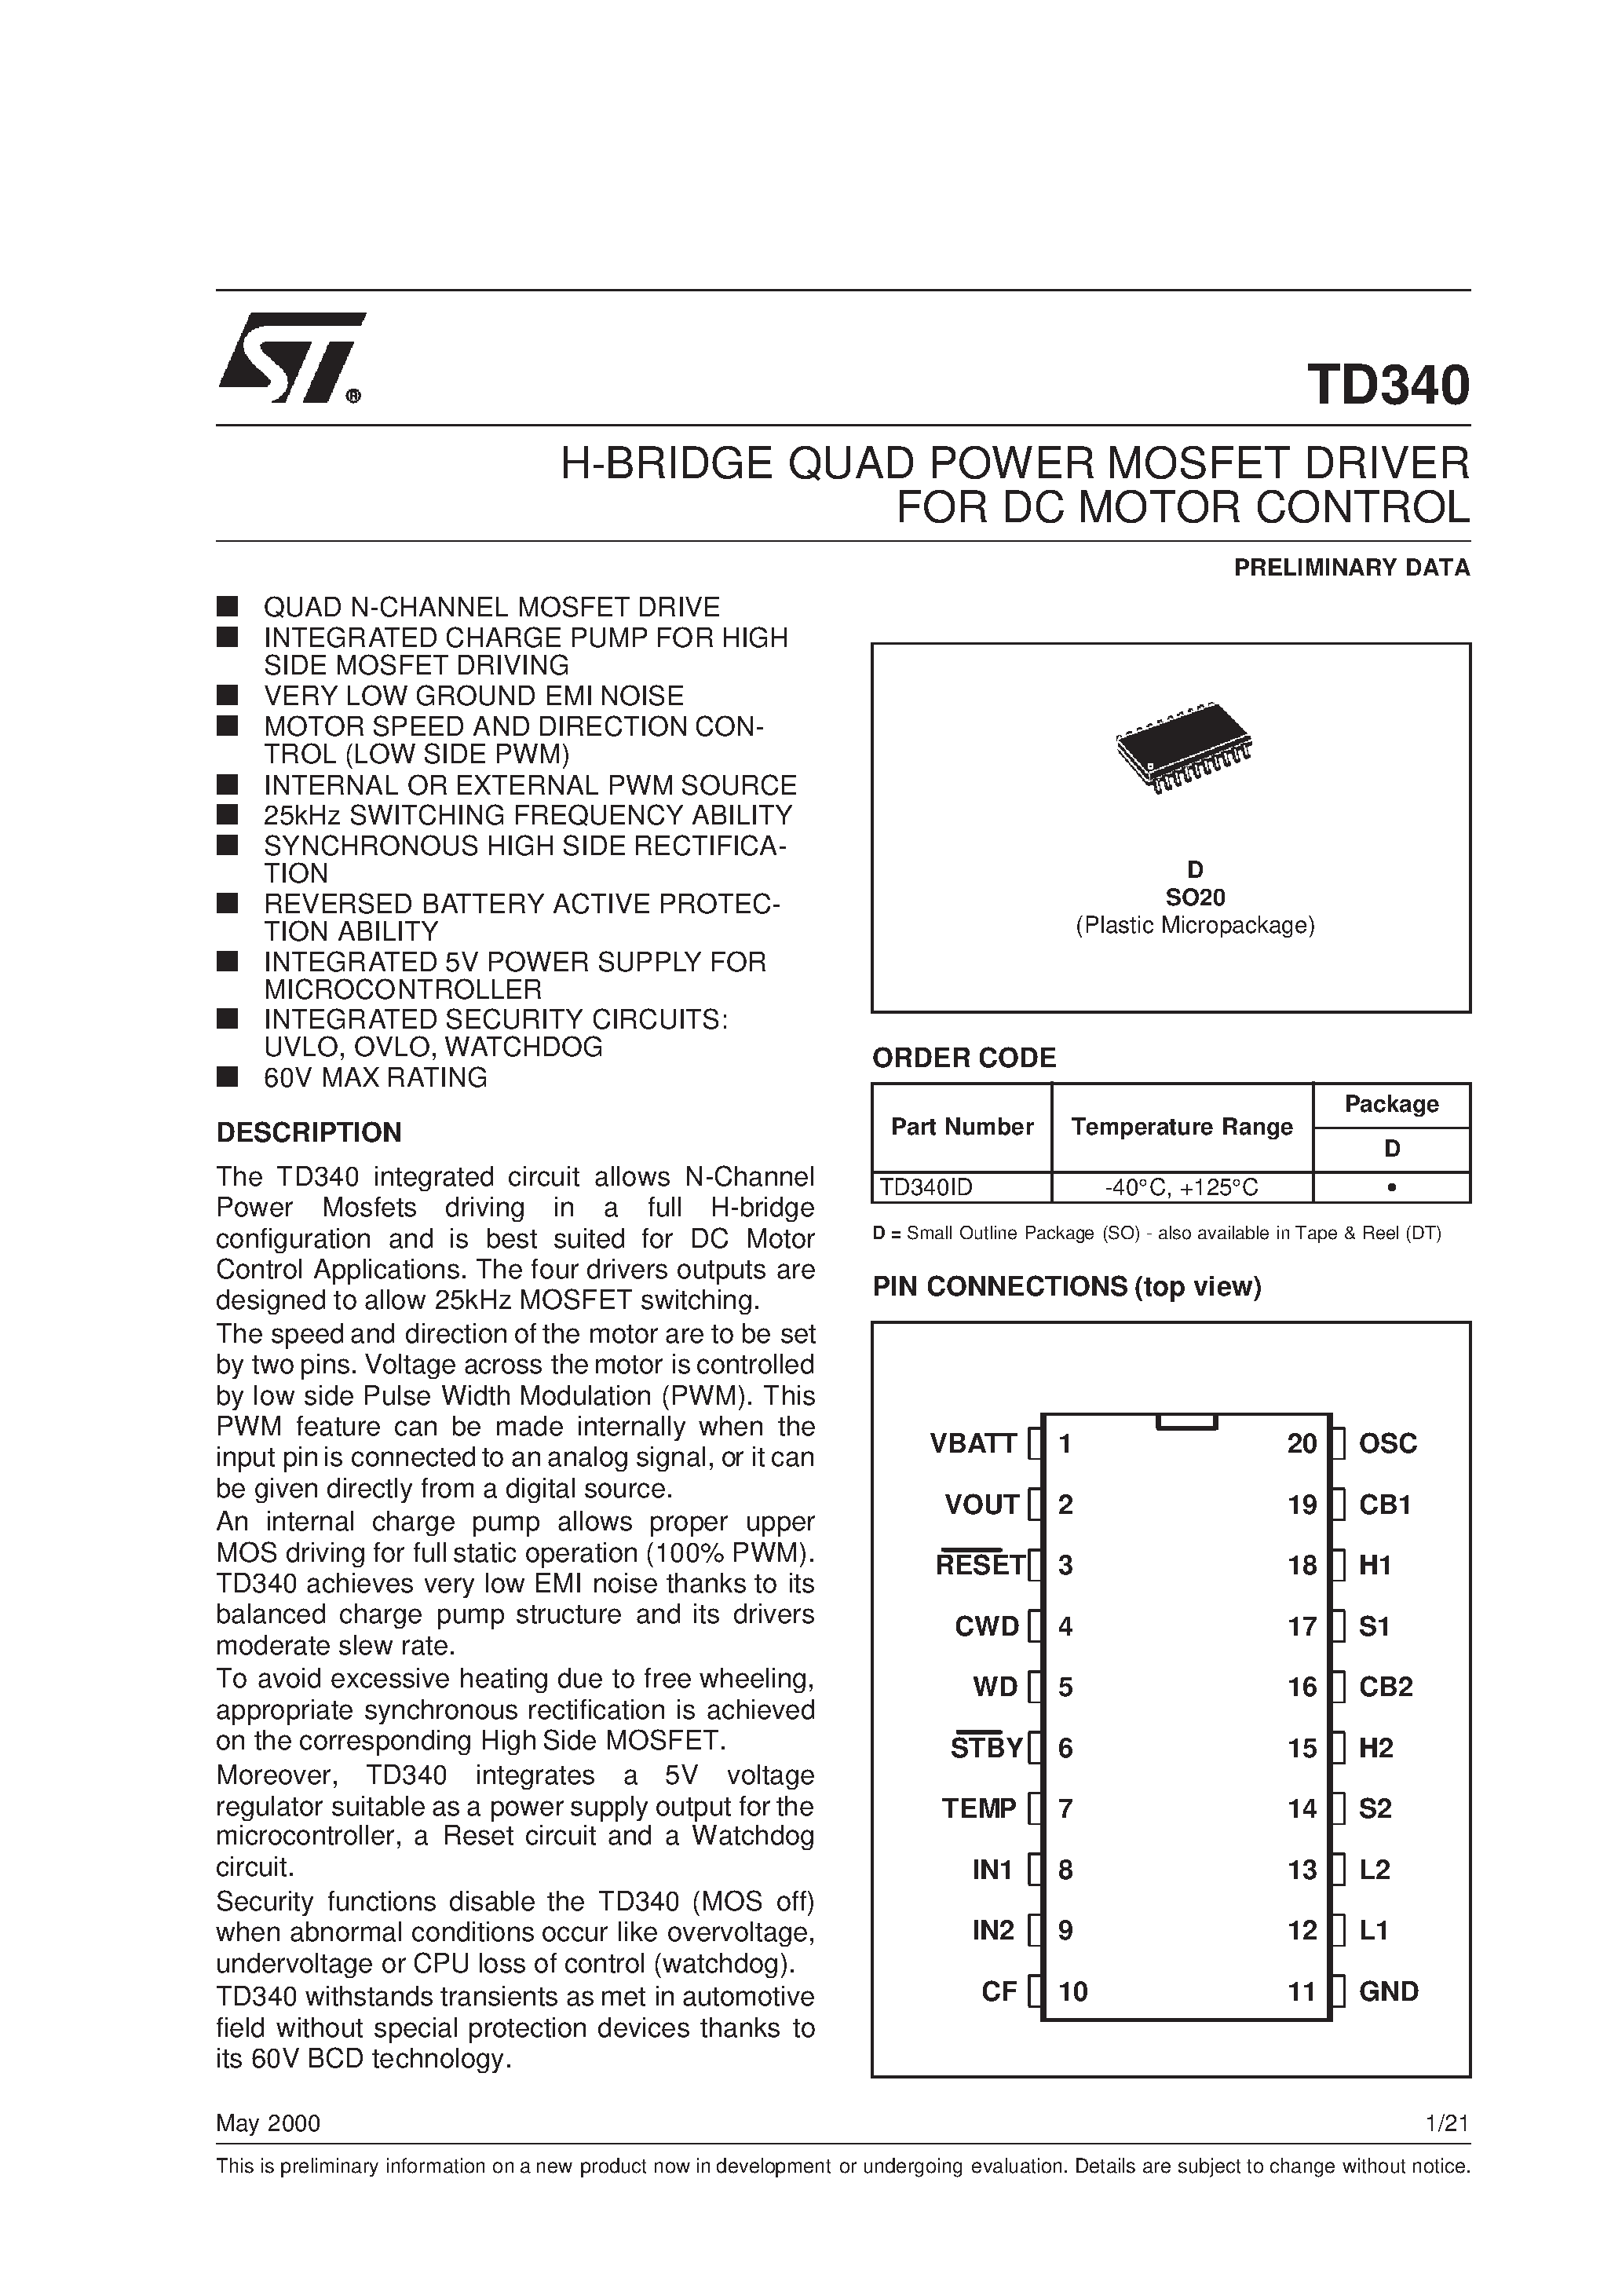 Datasheet TD340ID - H-BRIDGE QUAD POWER MOSFET DRIVER FOR DC MOTOR CONTROL page 1